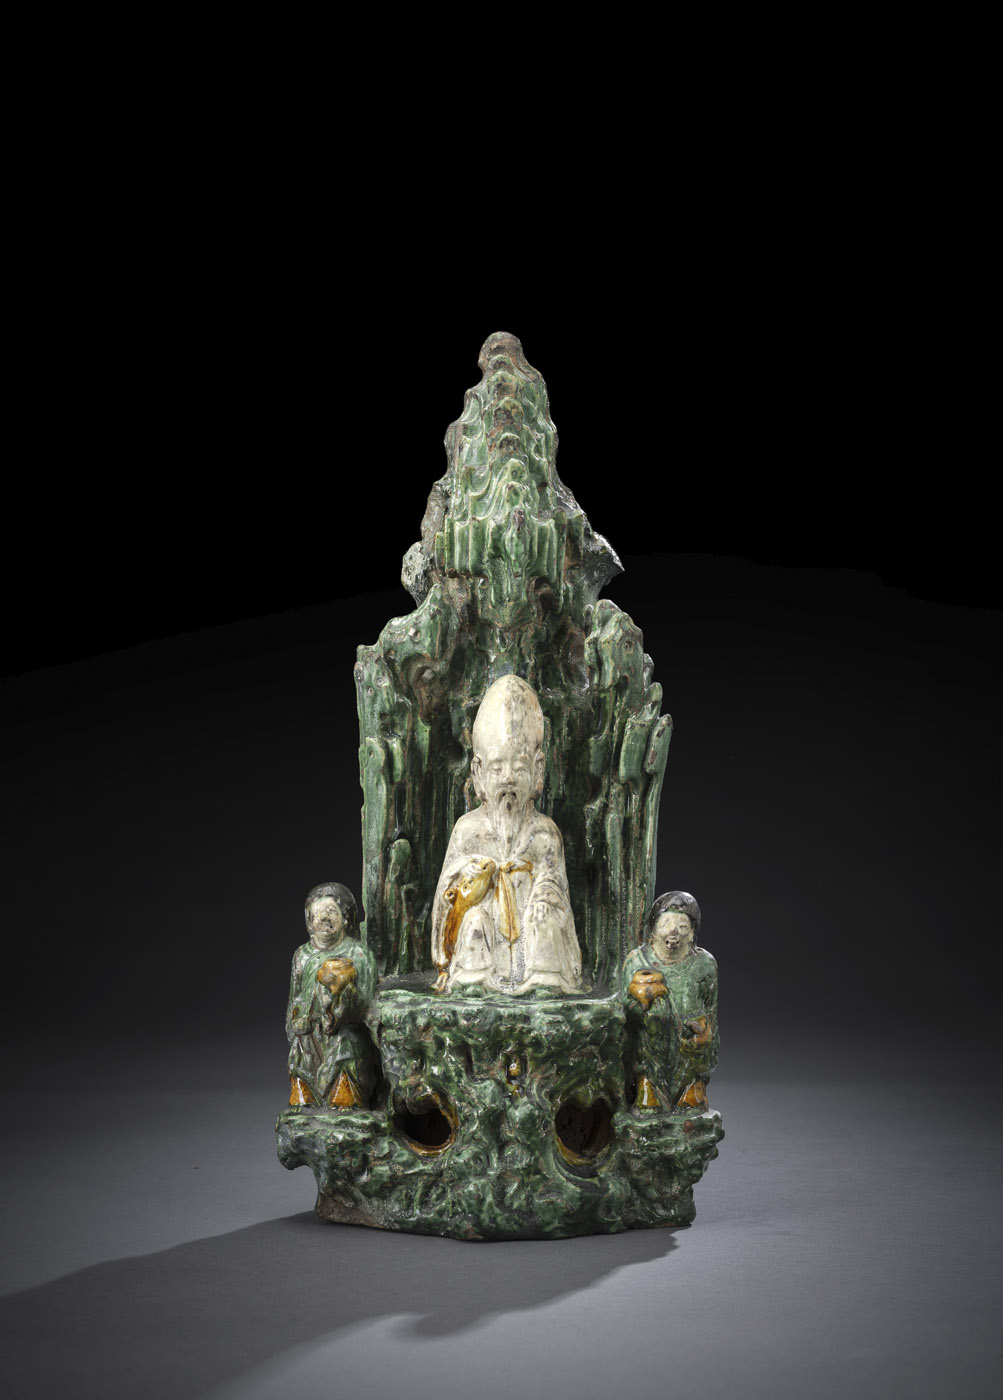 <b>A FAHUA GROTTO WITH SHOULAO AND TWO ADORANTS</b>